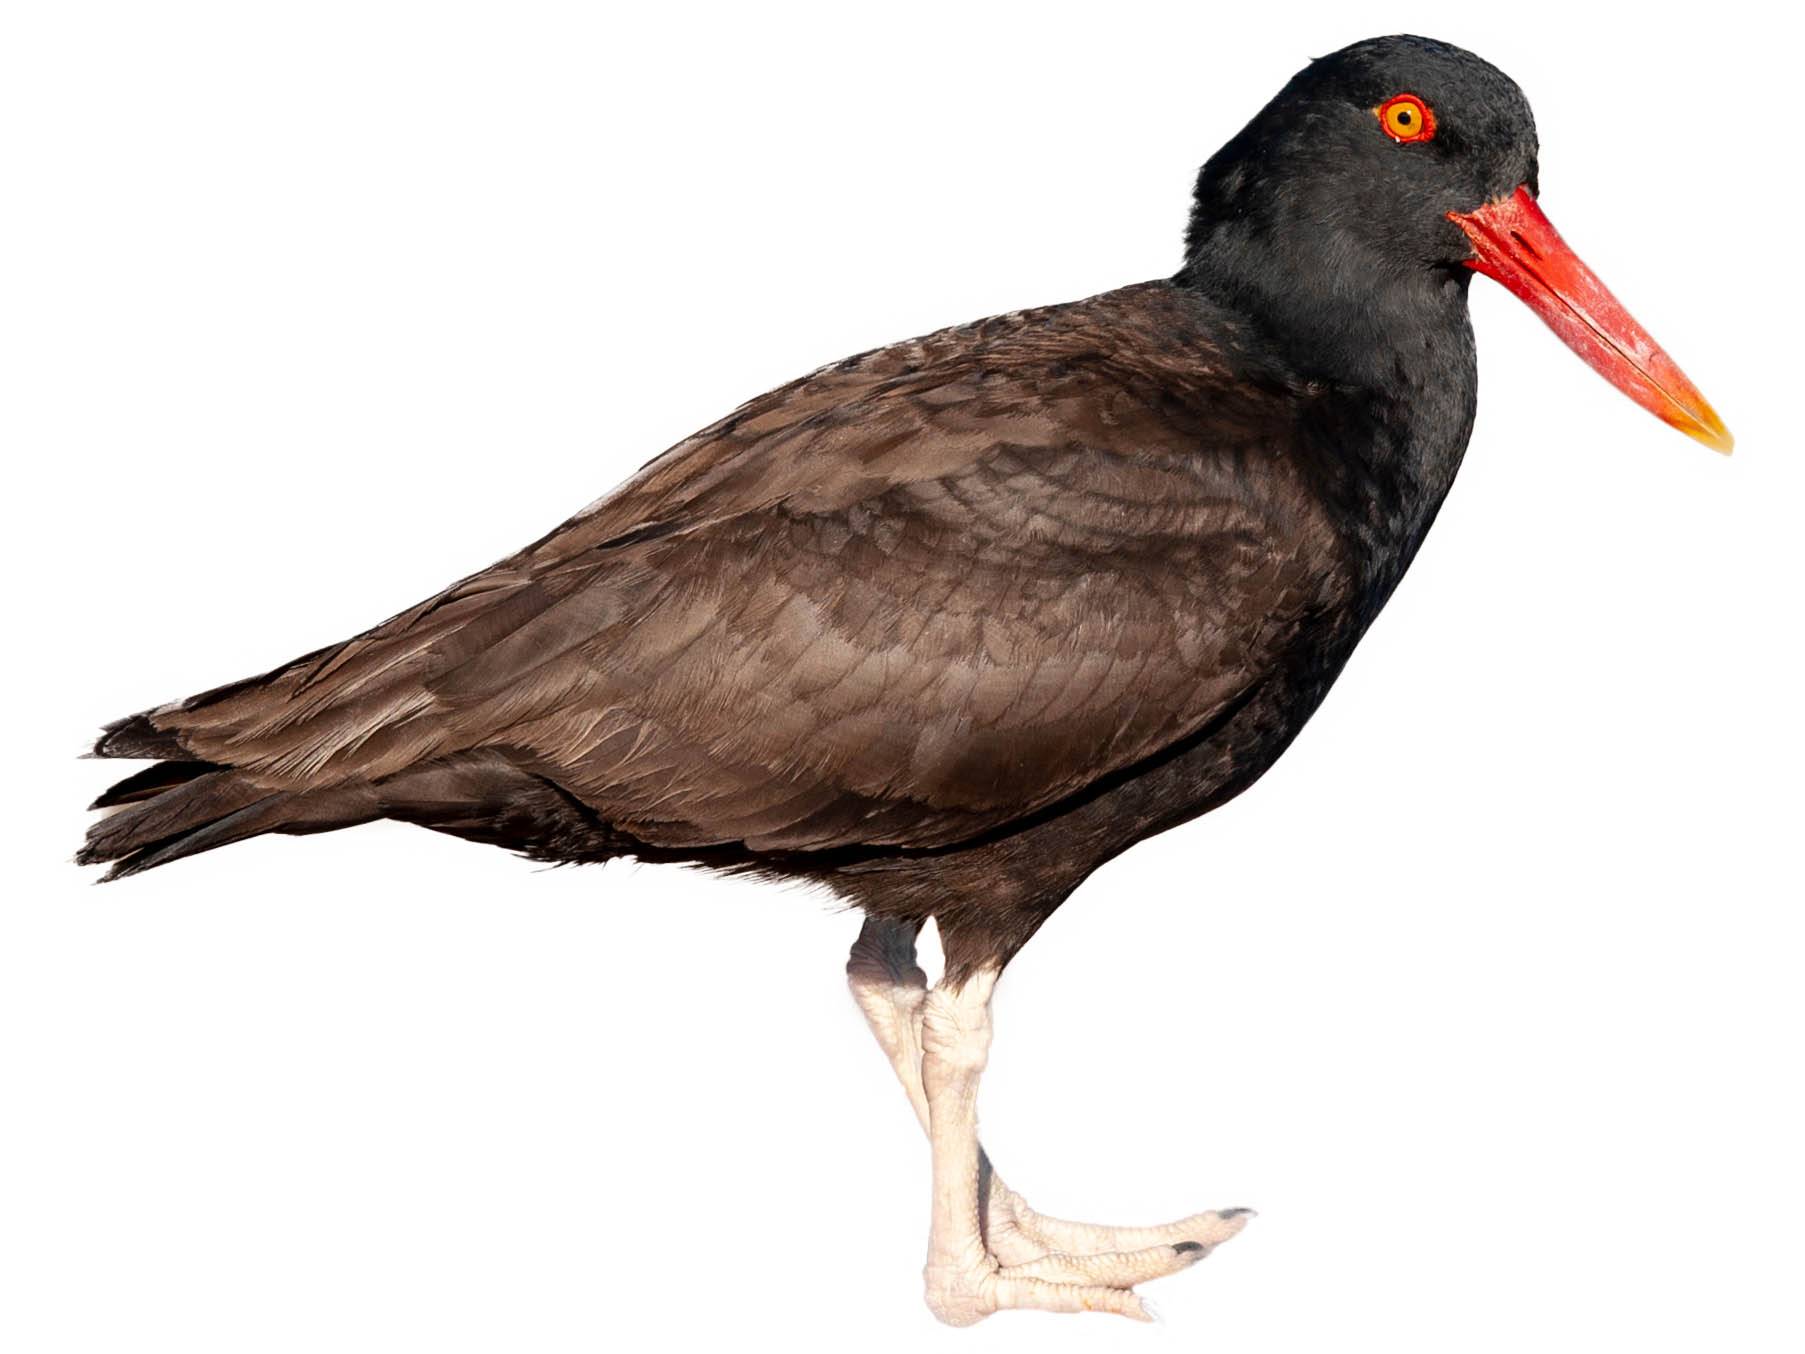 A photo of a Blackish Oystercatcher (Haematopus ater)